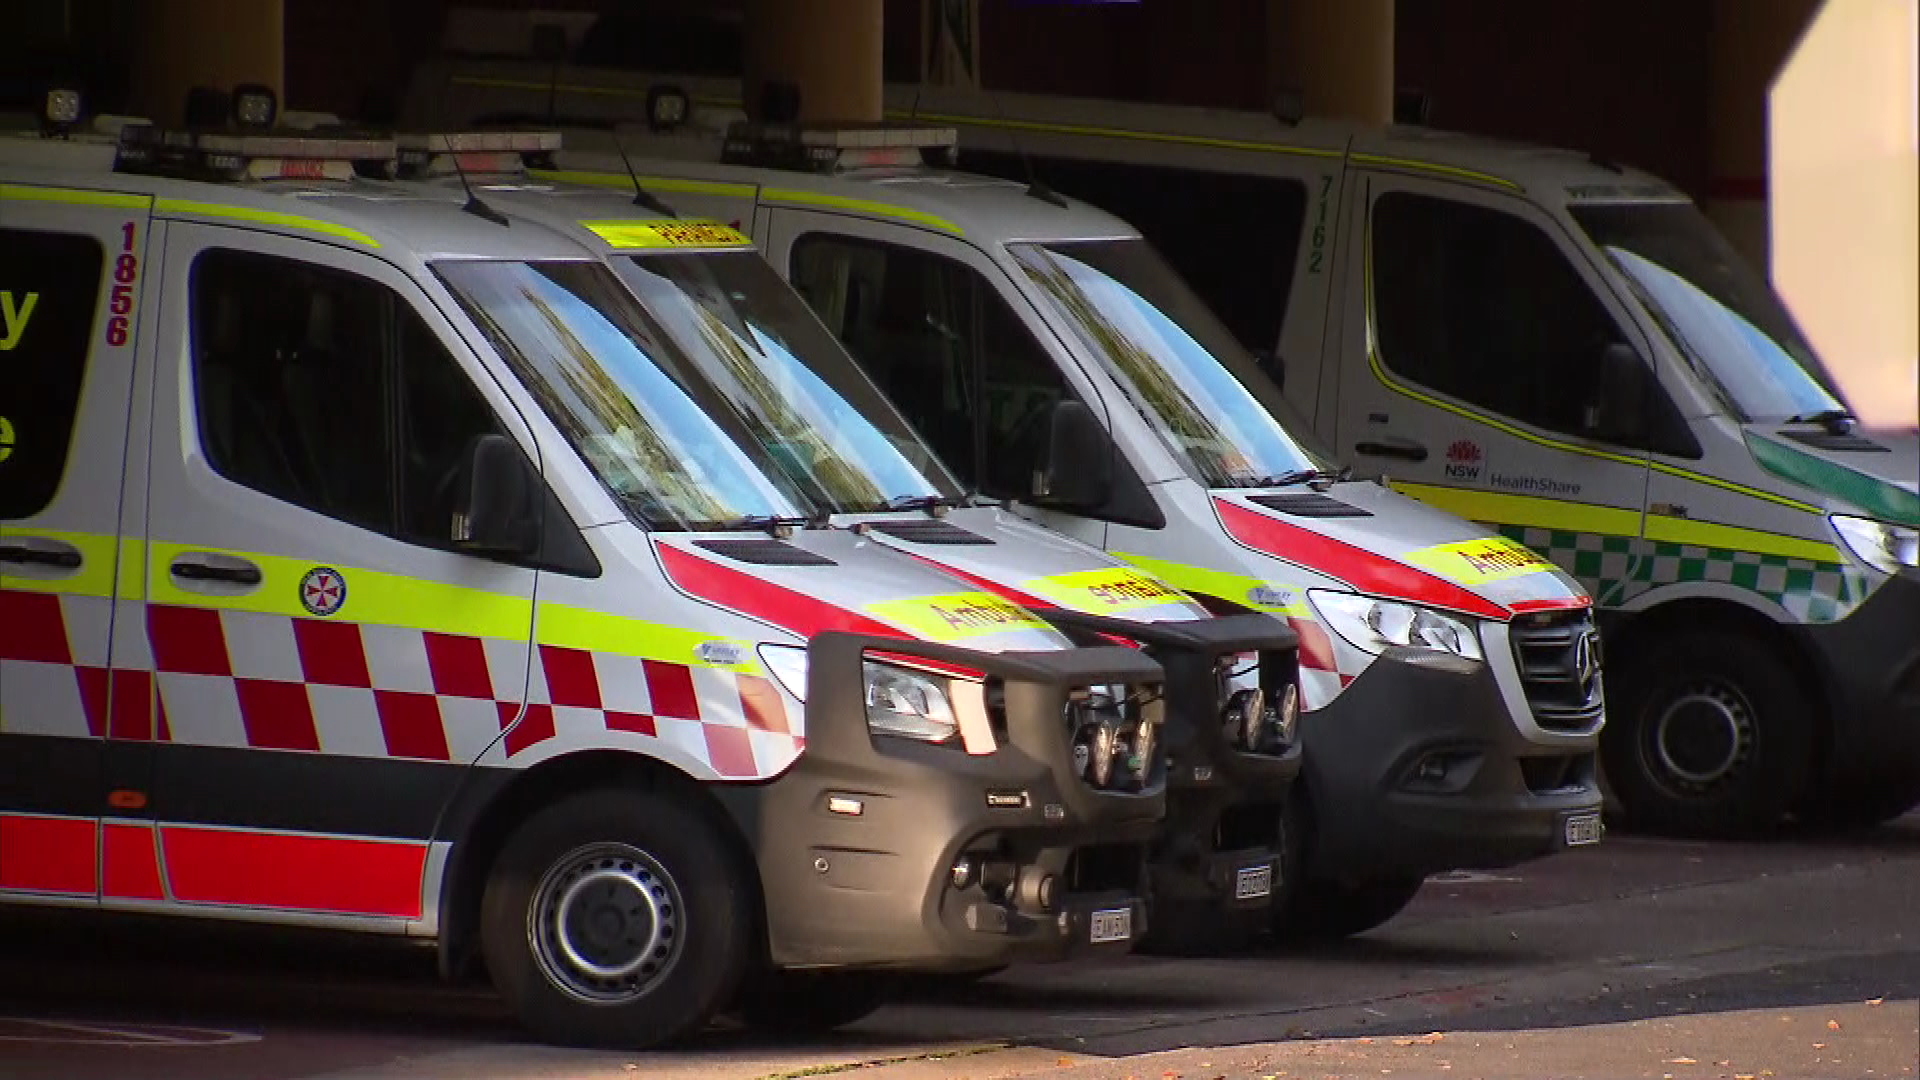 NSW records its deadliest day, with 49 COVID-19 related deaths